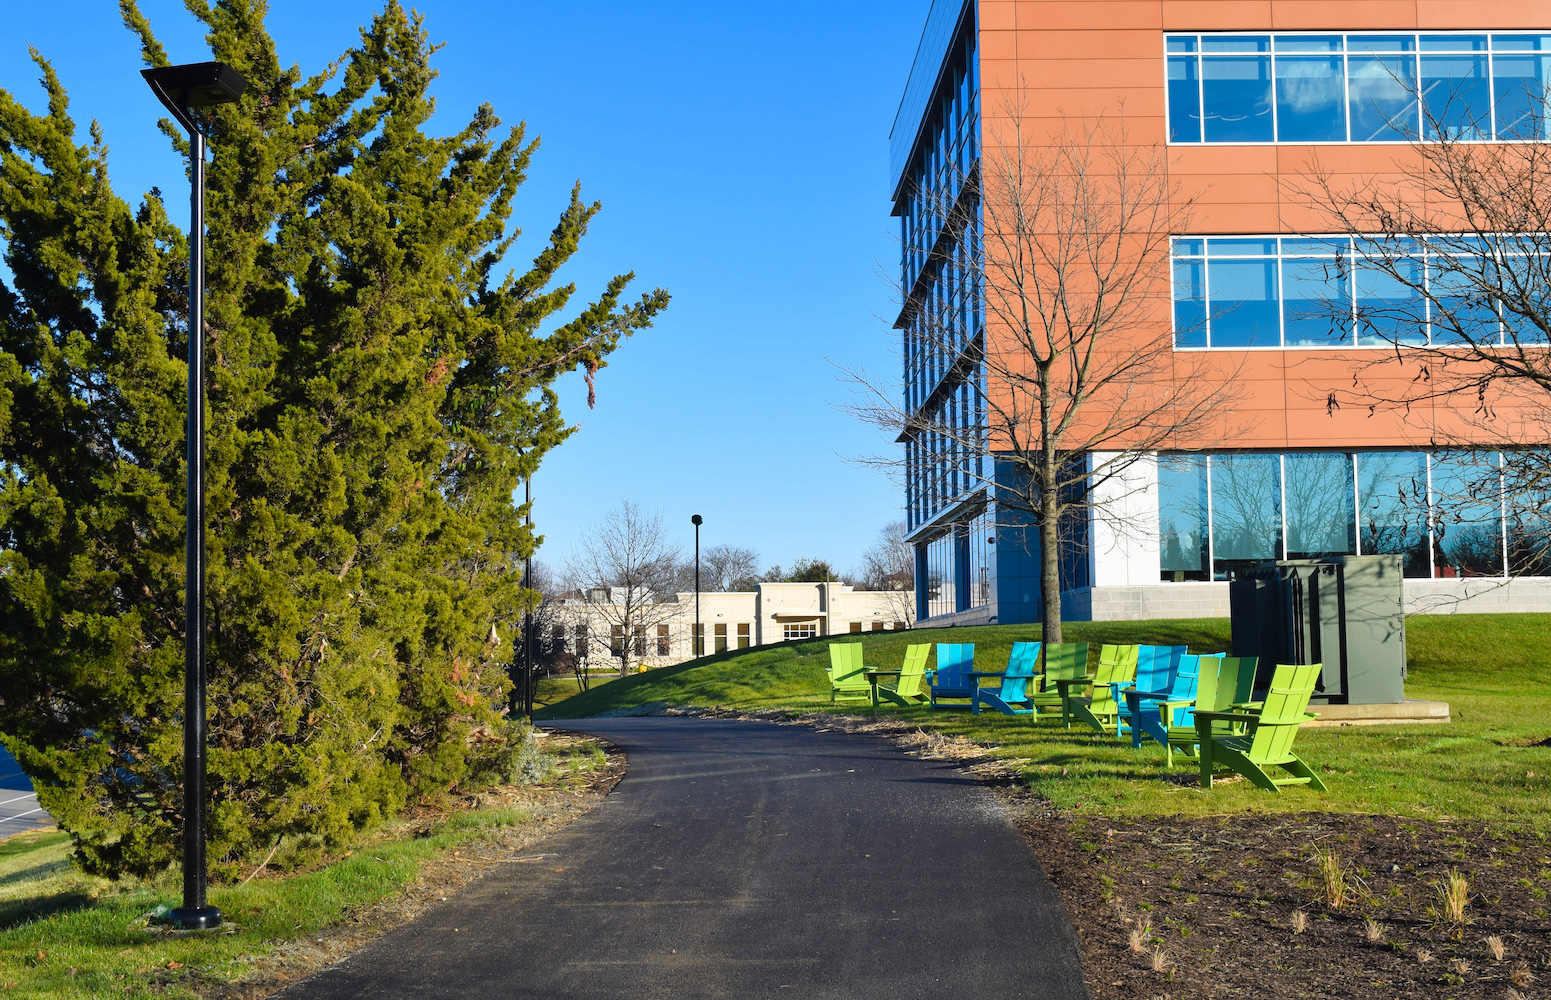 outdoor view with a pathway, trees, light posts, colorful chairs and a red brick building